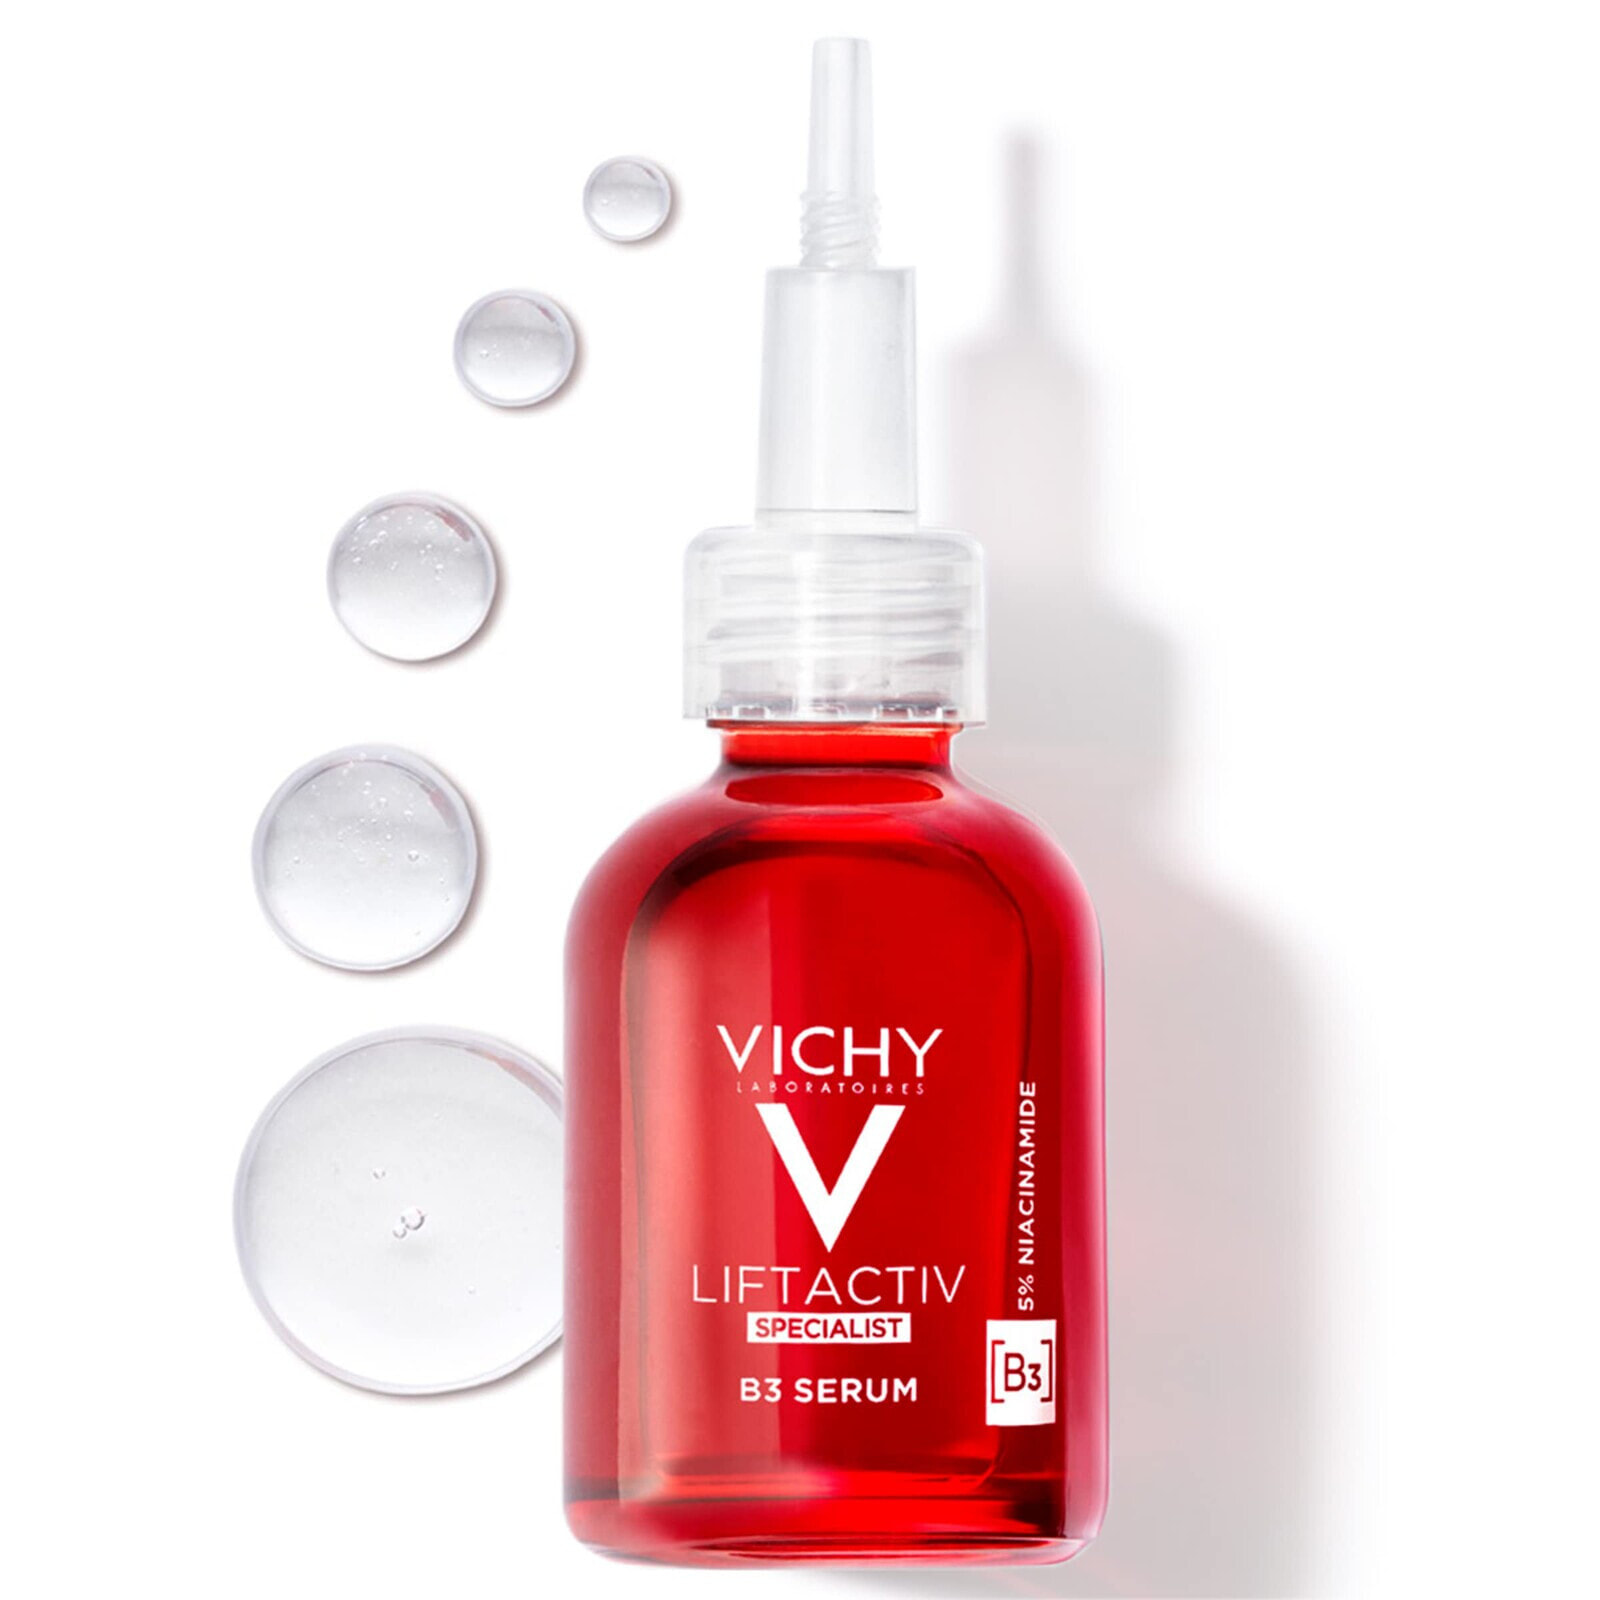 Serum against pigment spots and wrinkles Liftactiv Special ist B3 (Serum) 30 ml